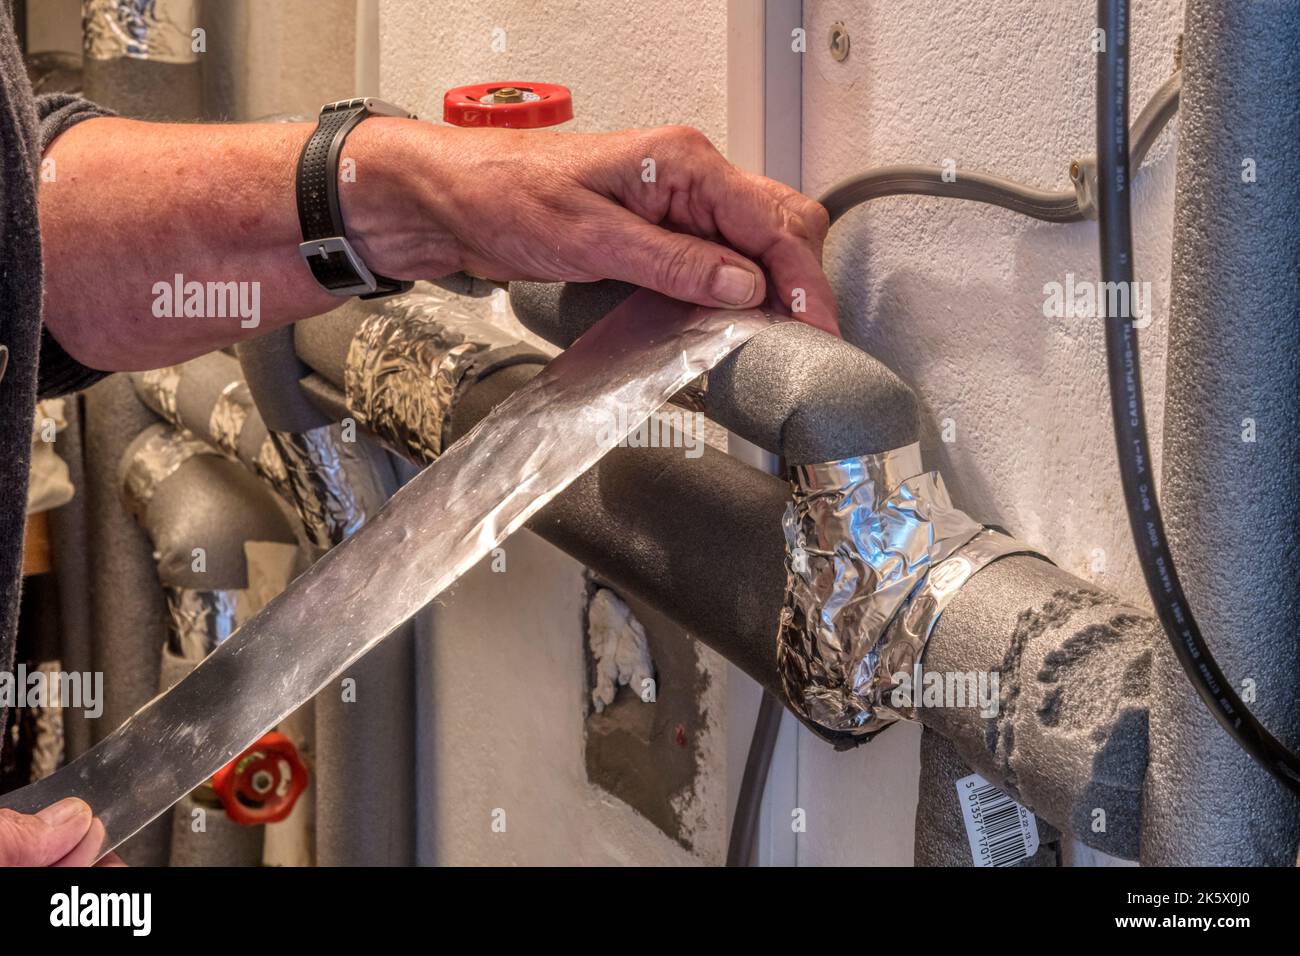 Woman lagging and taping hot water pipes in an airing cupboard to conserve heat and improve energy efficiency. Stock Photo